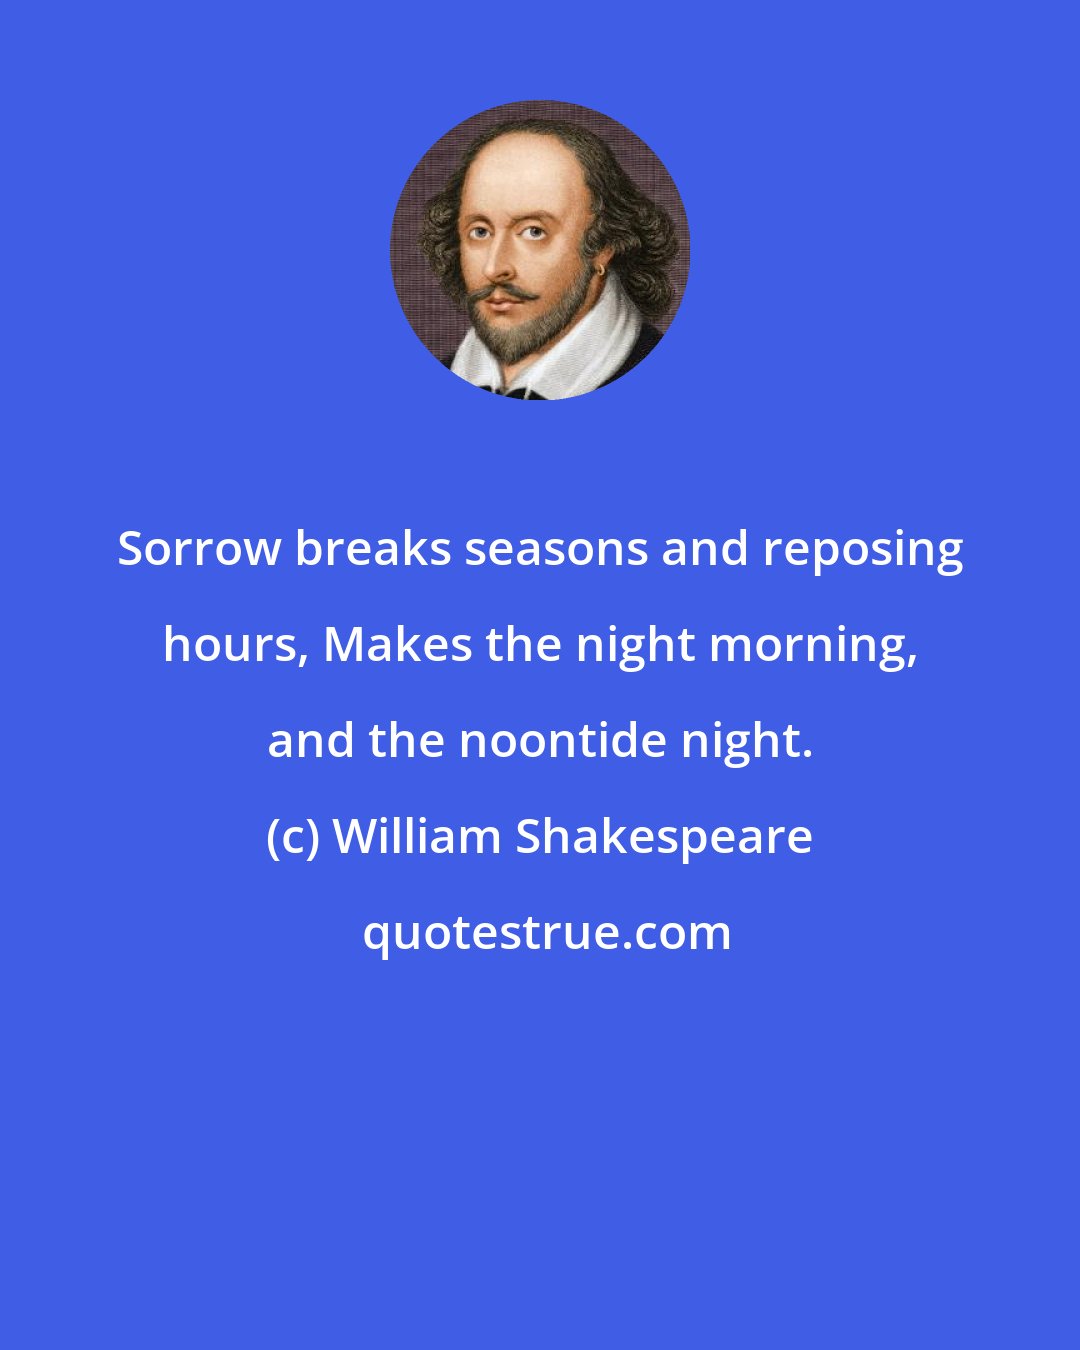 William Shakespeare: Sorrow breaks seasons and reposing hours, Makes the night morning, and the noontide night.